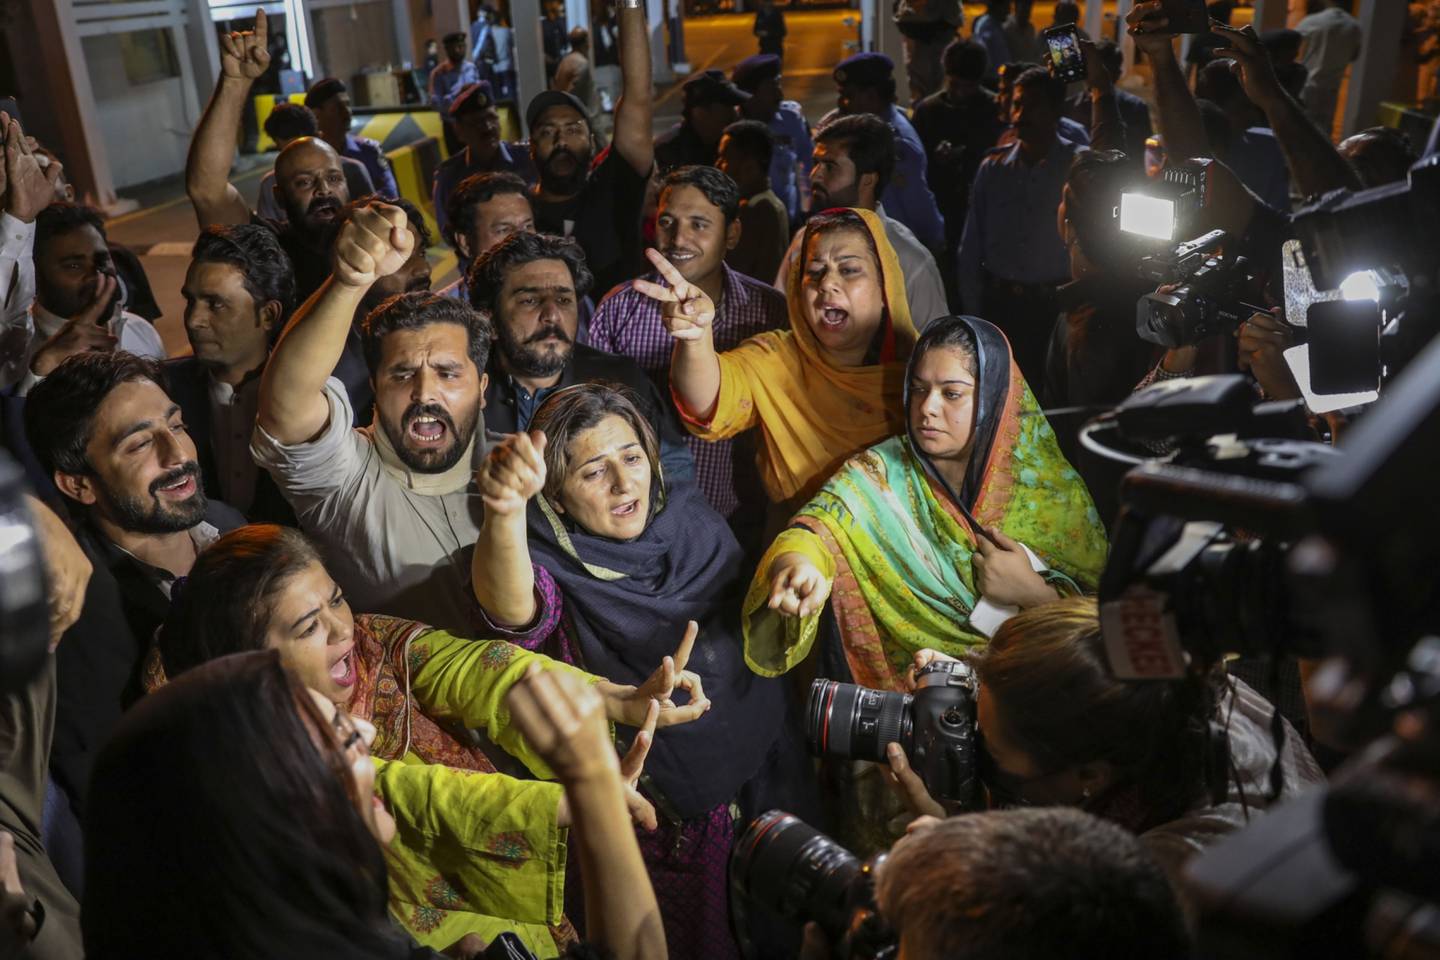 Lawmakers and supporters of Imran Khan, Pakistan's prime minister, chant slogans outside the National Assembly in Islamabad, Pakistan, on Sunday, April 10, 2022. Pakistan Prime Minister Imran Khan was ousted from office after losing a no-confidence vote following a week of dramatic political developments, becoming the first elected leader in the country's history to be removed by parliament.dfd